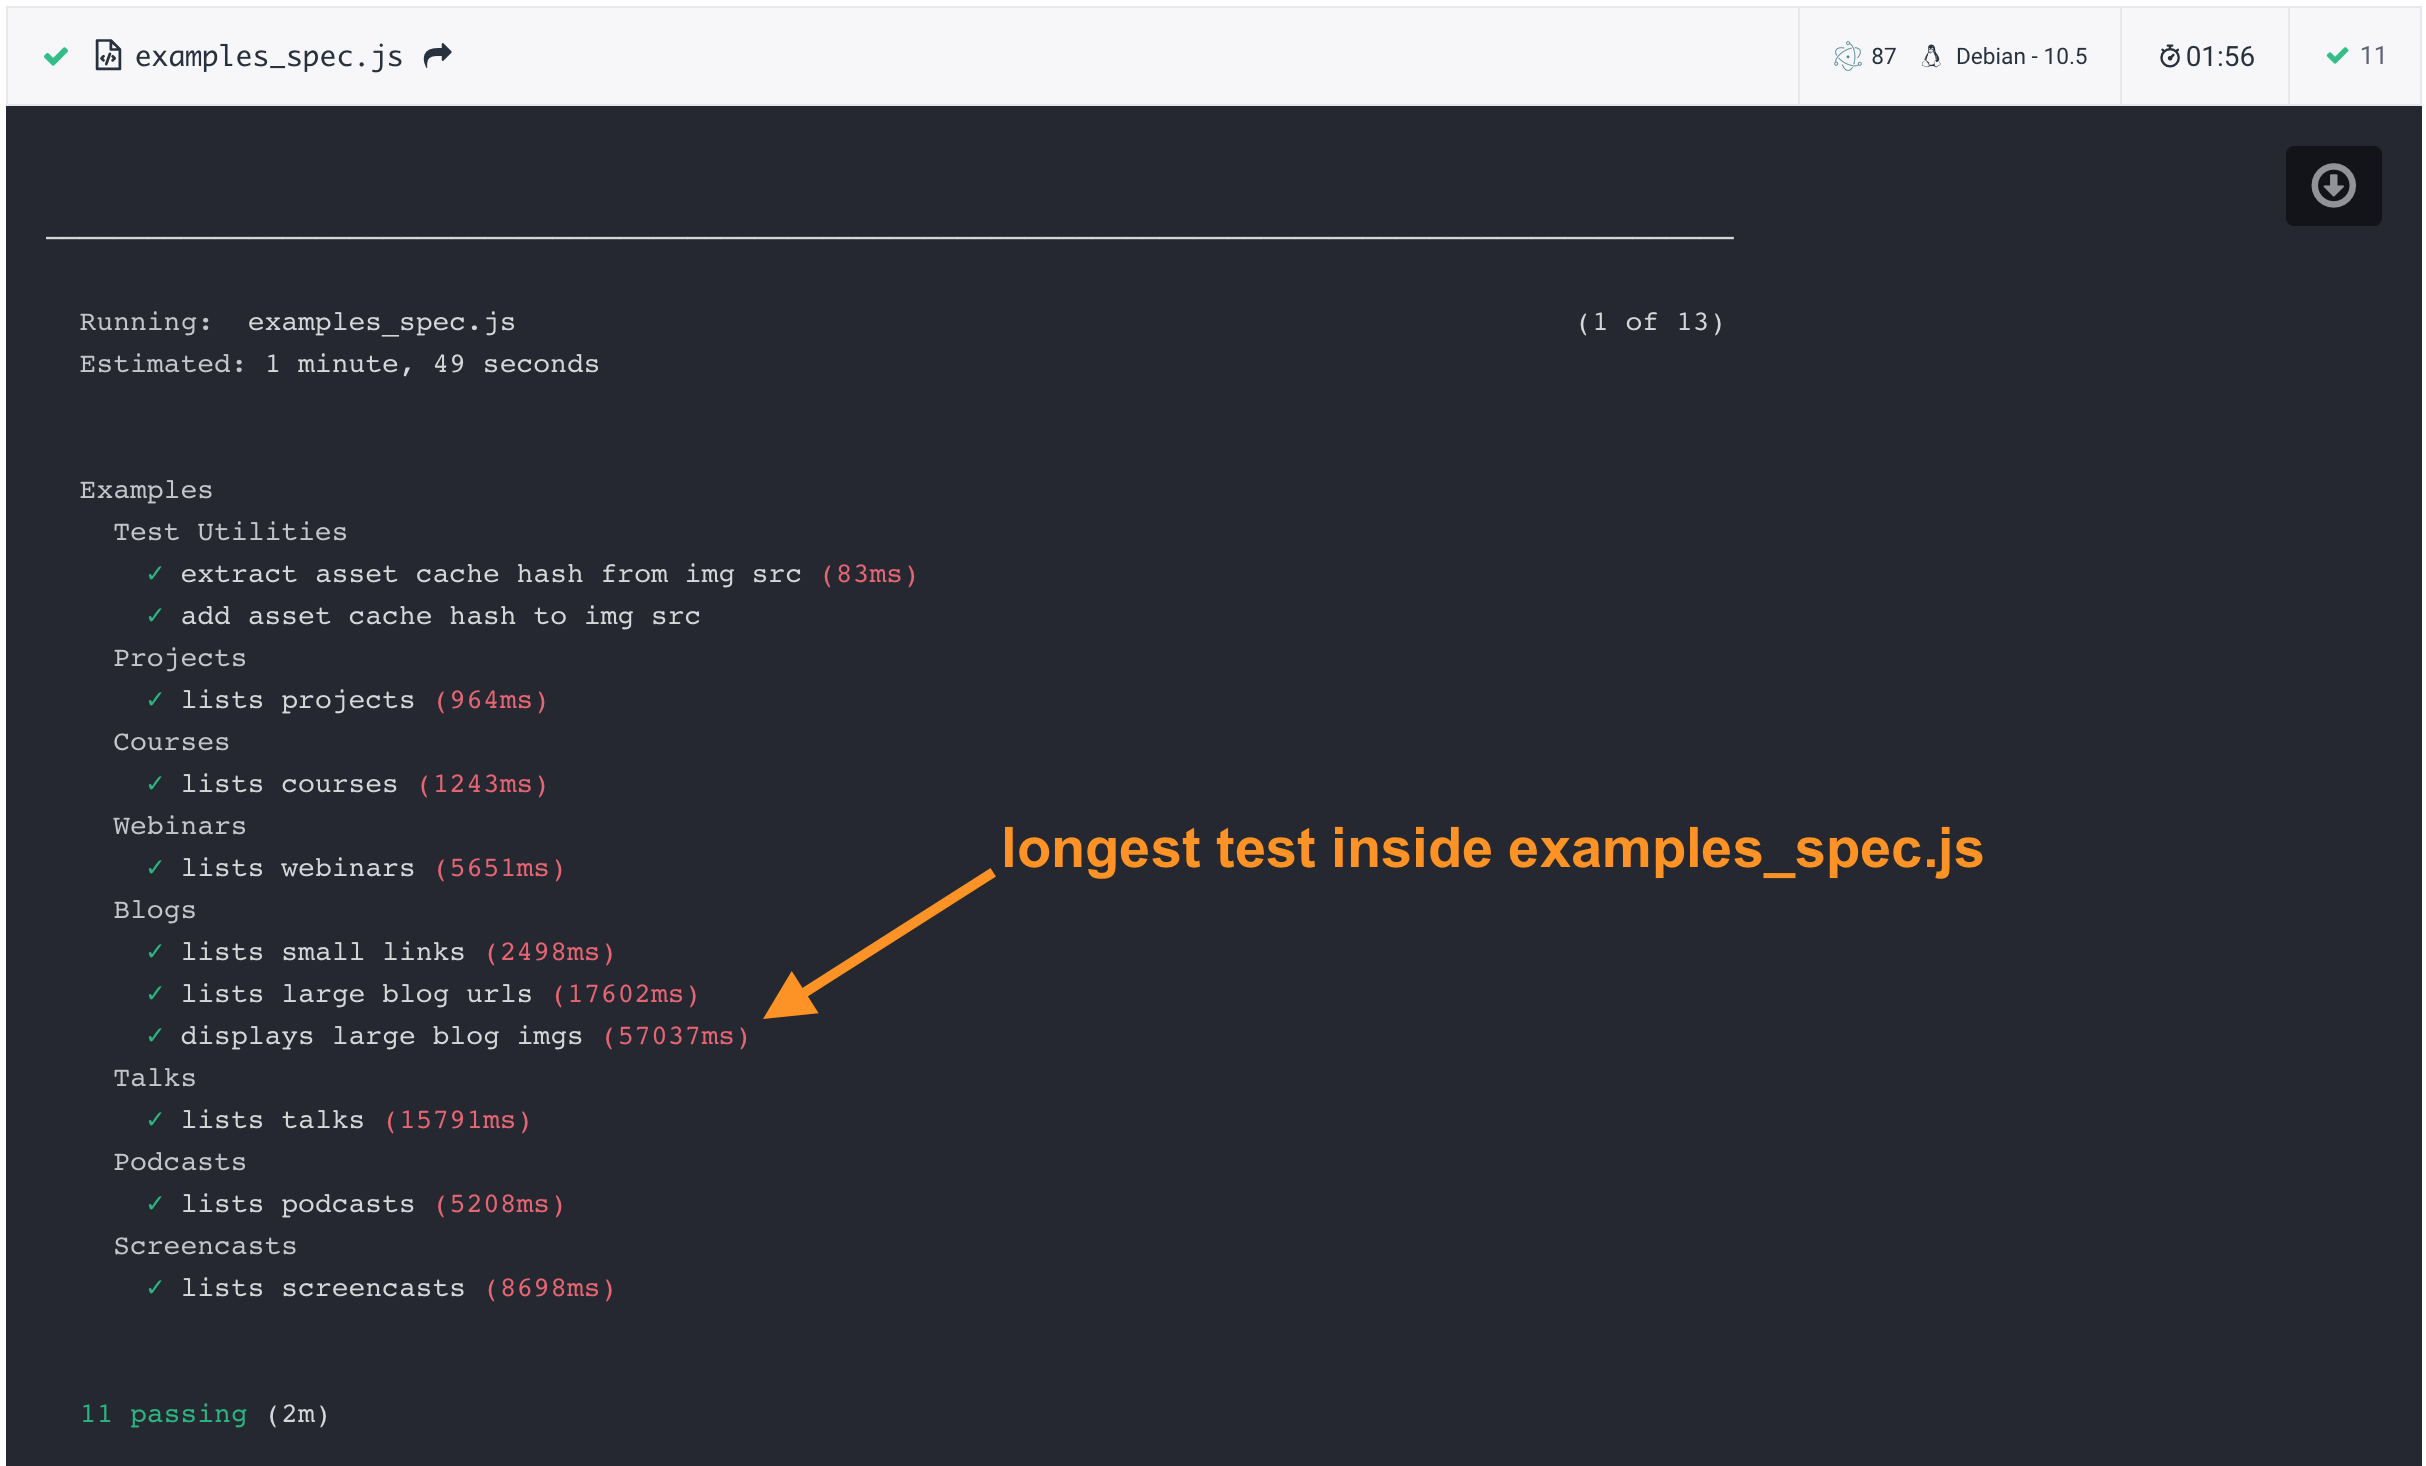 The individual tests inside the examples_spec.js and their duration